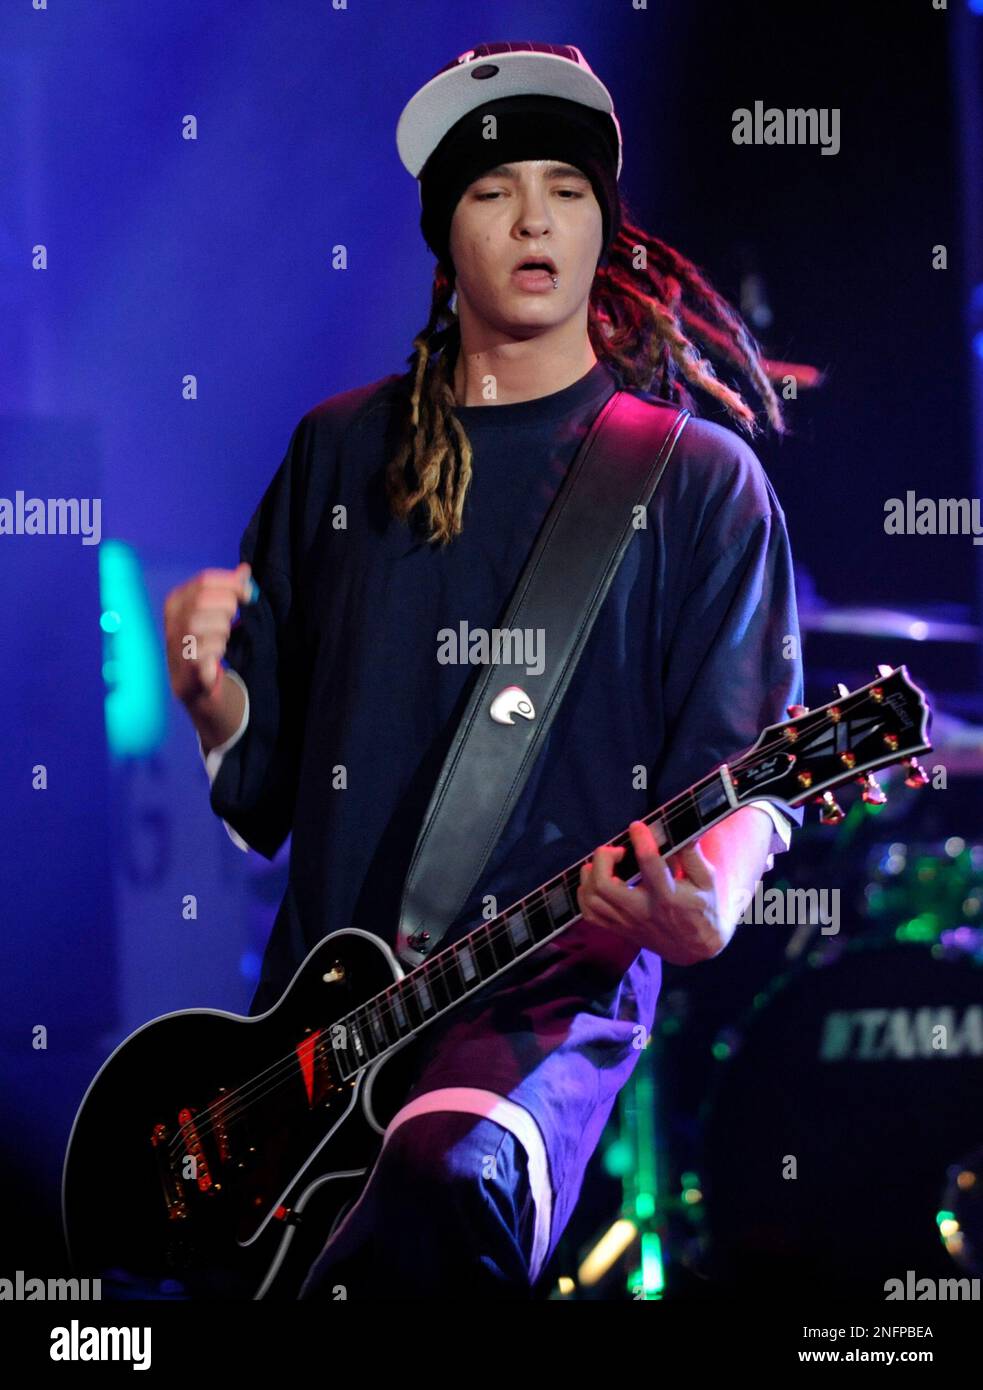 Tom Kaulitz of the German band Tokio Hotel performs at the Avalon Hollywood  club in Los Angeles, Tuesday, May 13, 2008. (AP Photo/Chris Pizzello Stock  Photo - Alamy